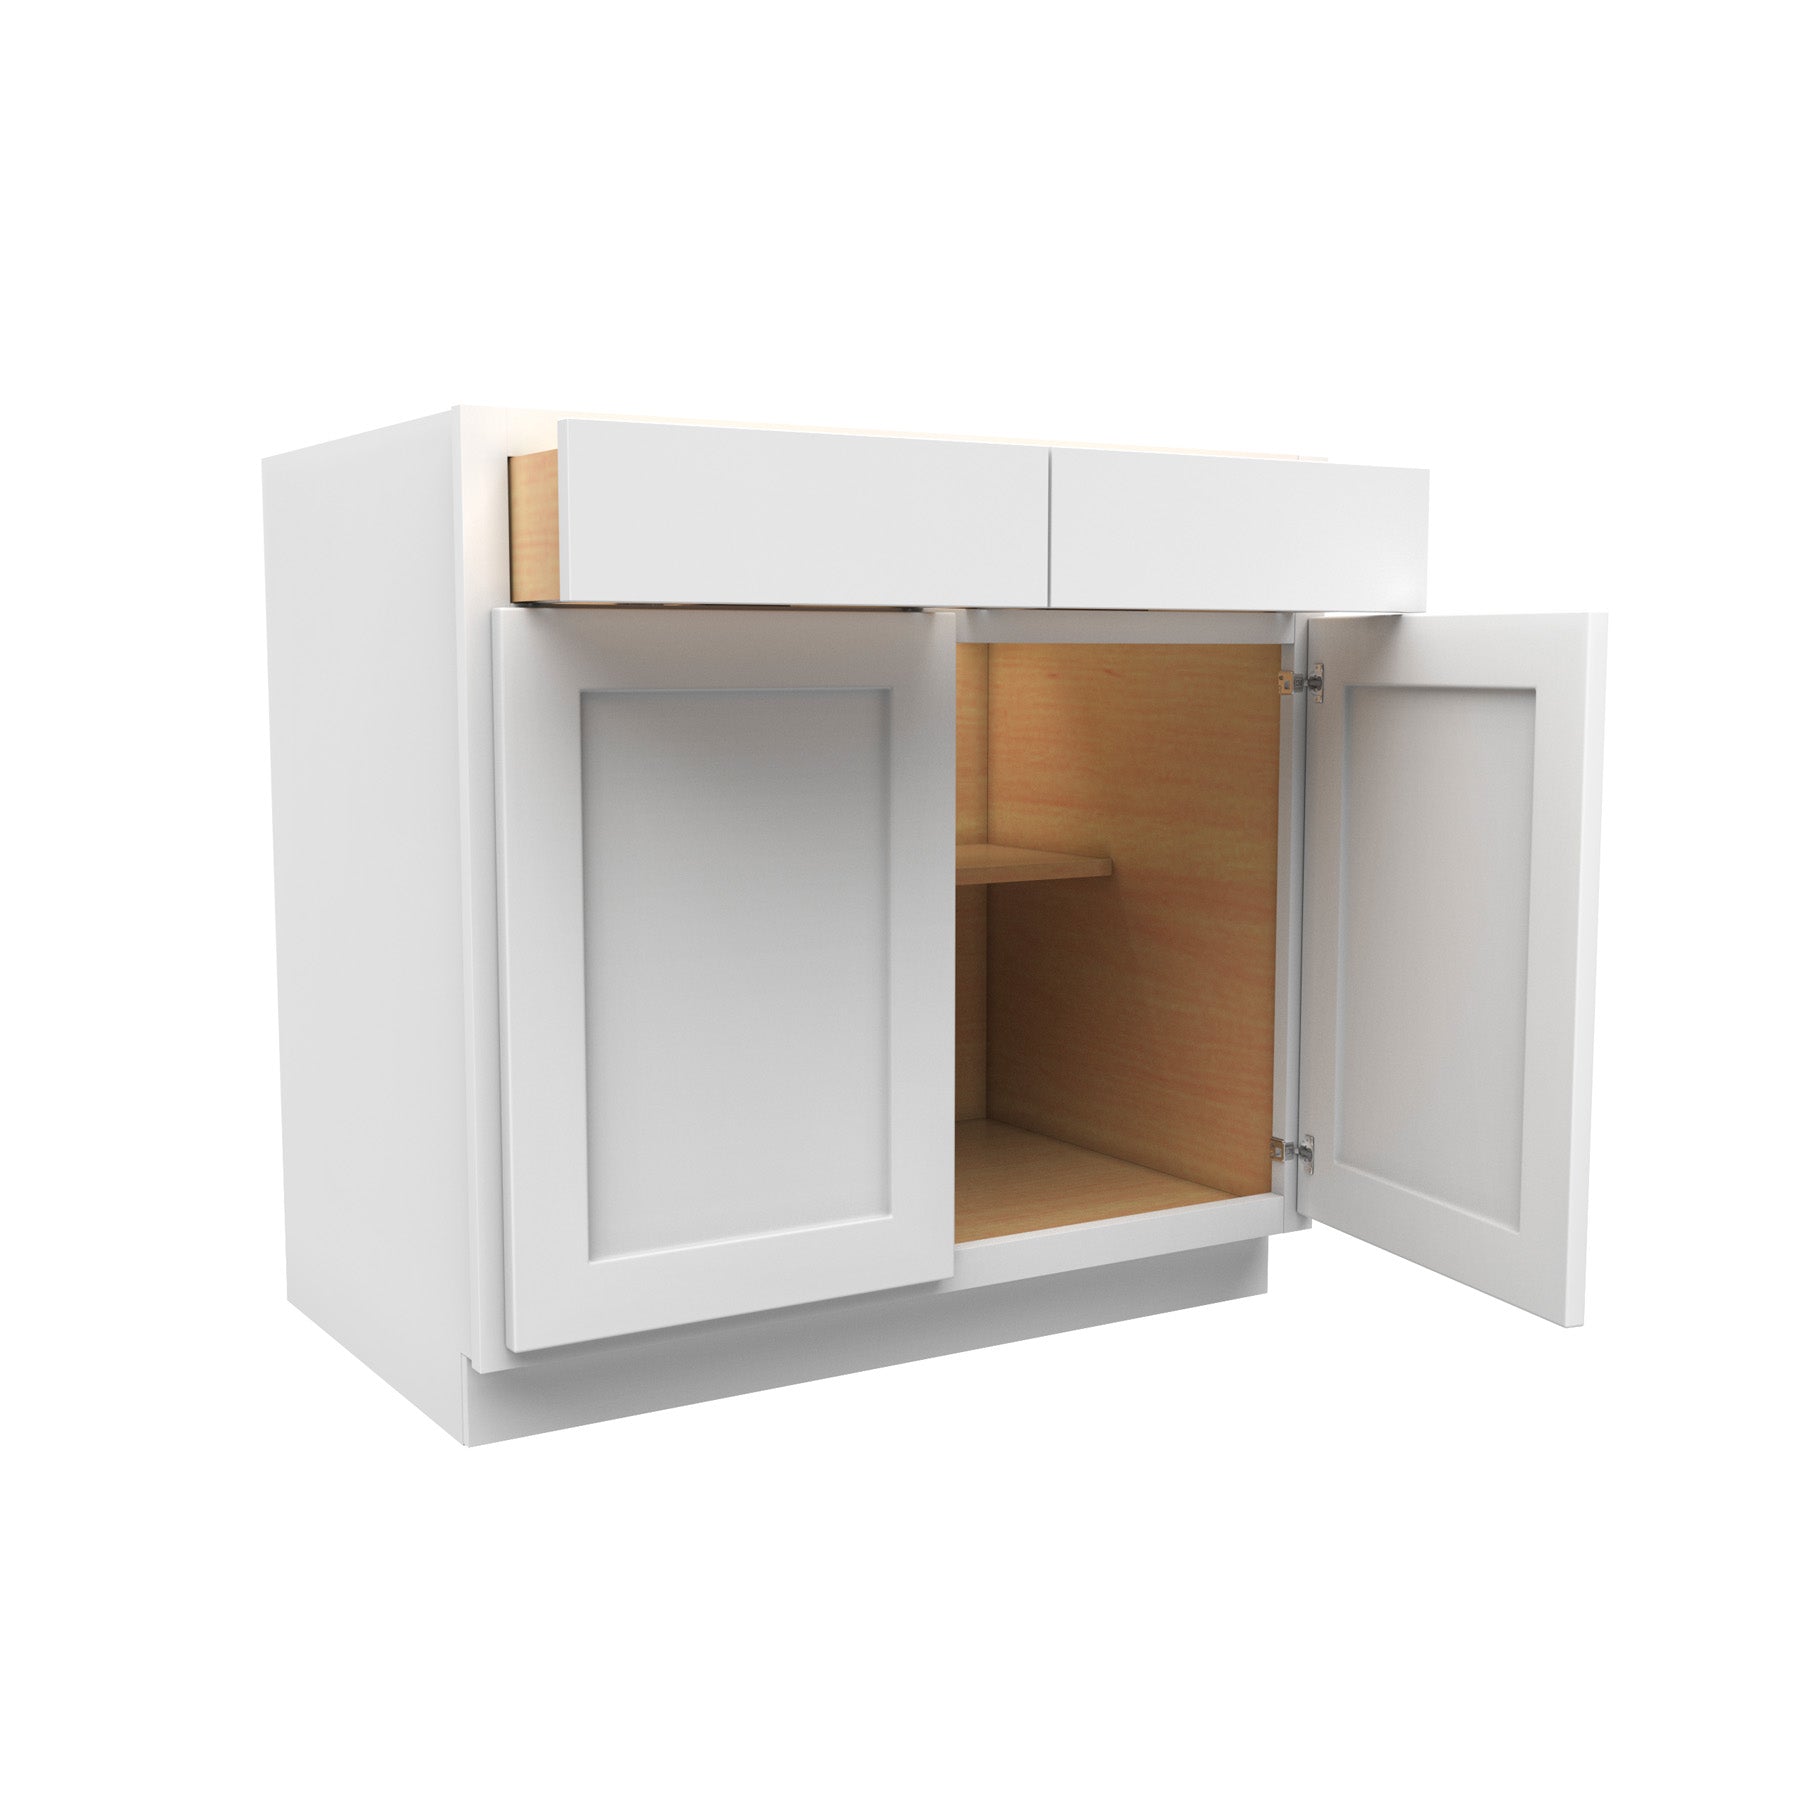 36 Inch Wide Double Door Base Cabinet - Luxor White Shaker - Ready To Assemble, 36"W x 34.5"H x 24"D